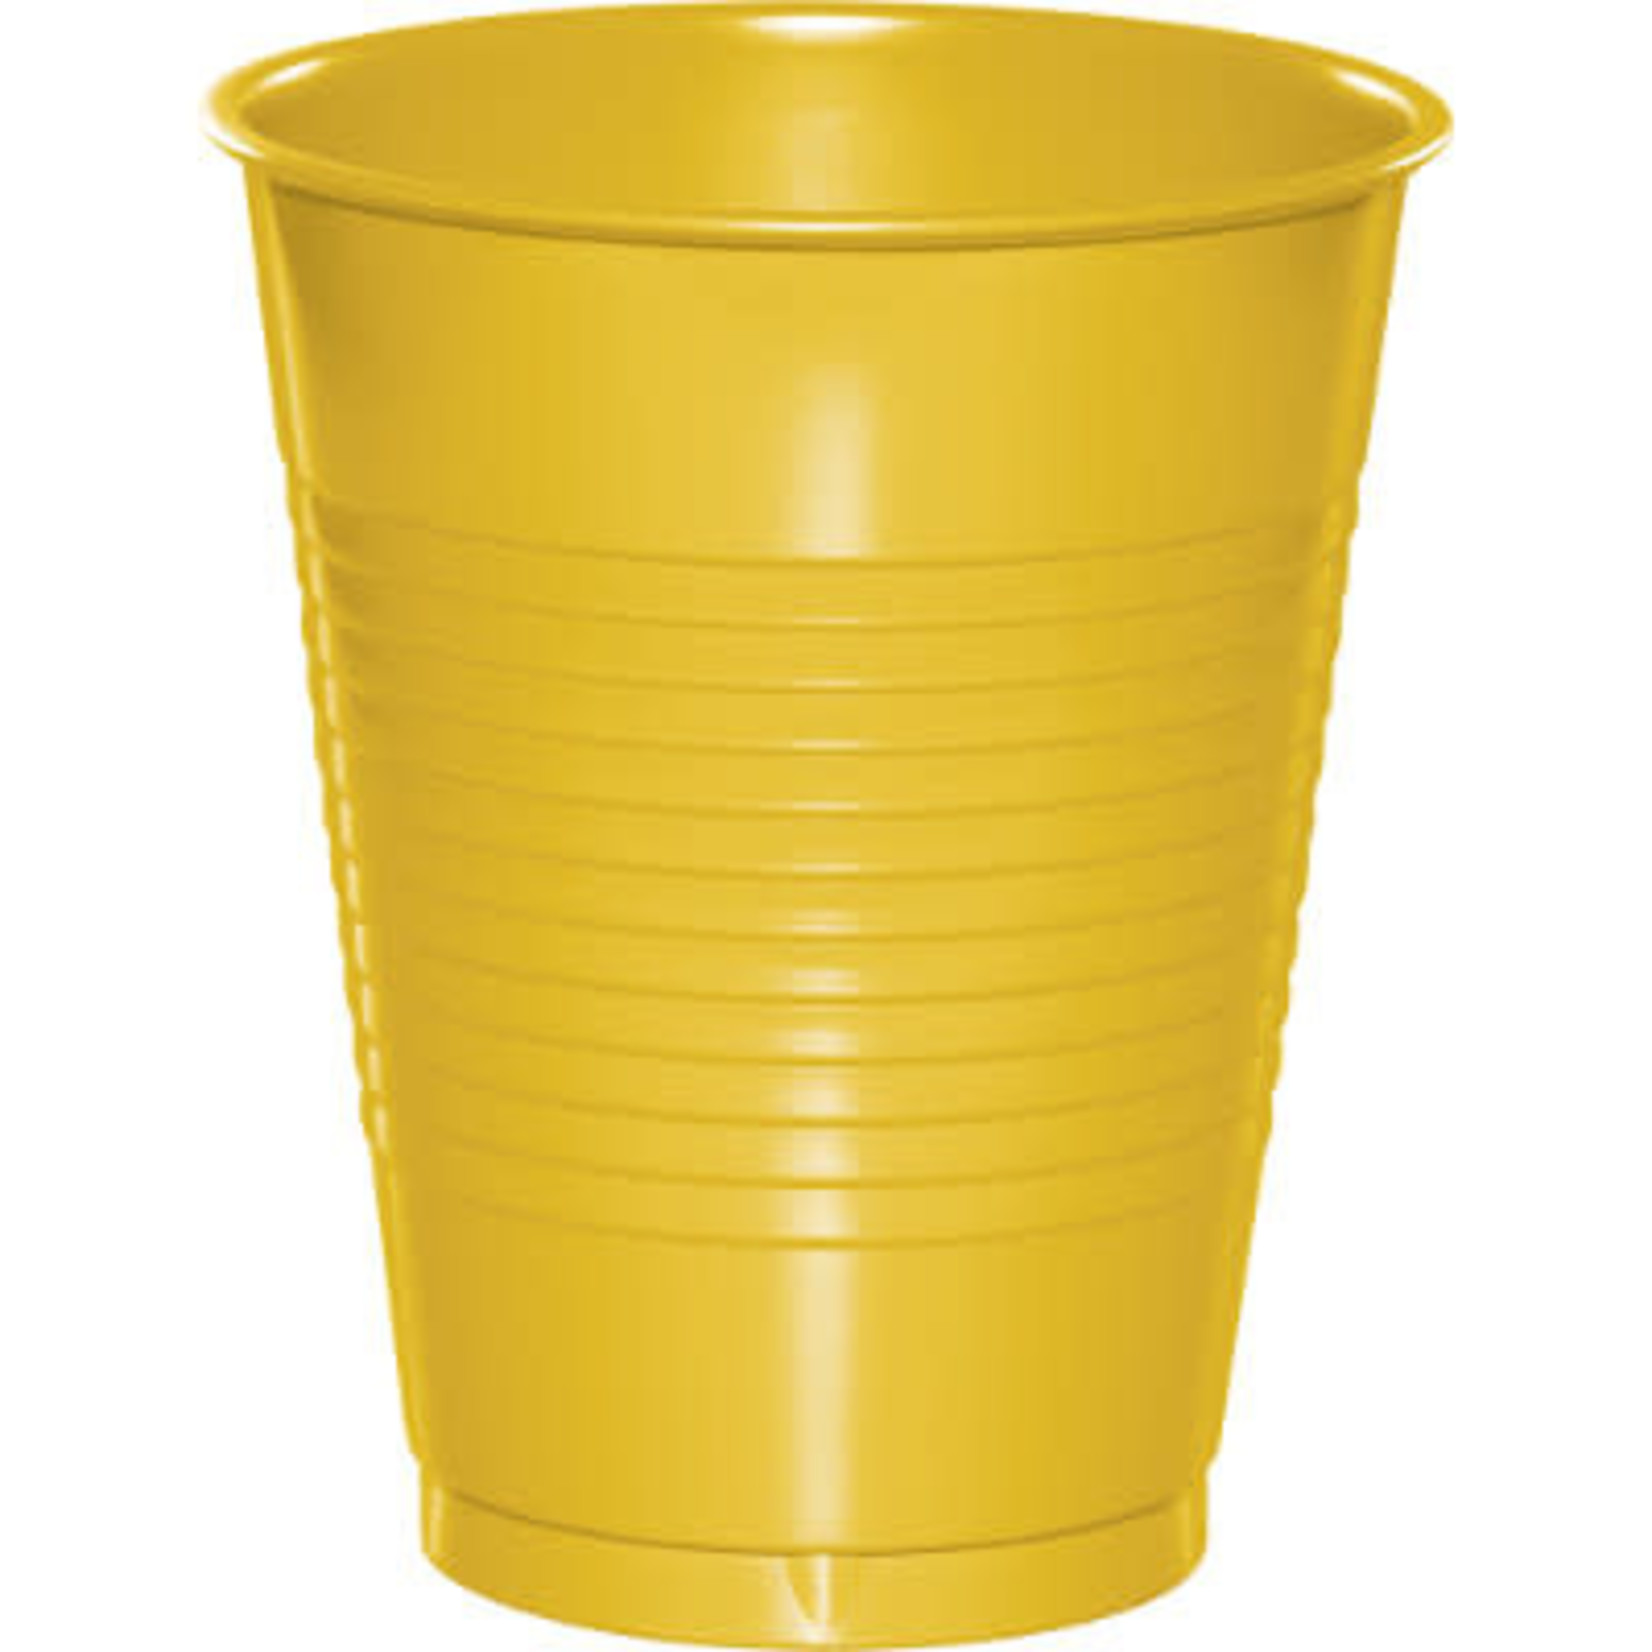 Touch of Color 16oz School Bus Yellow Plastic Cups - 20ct.